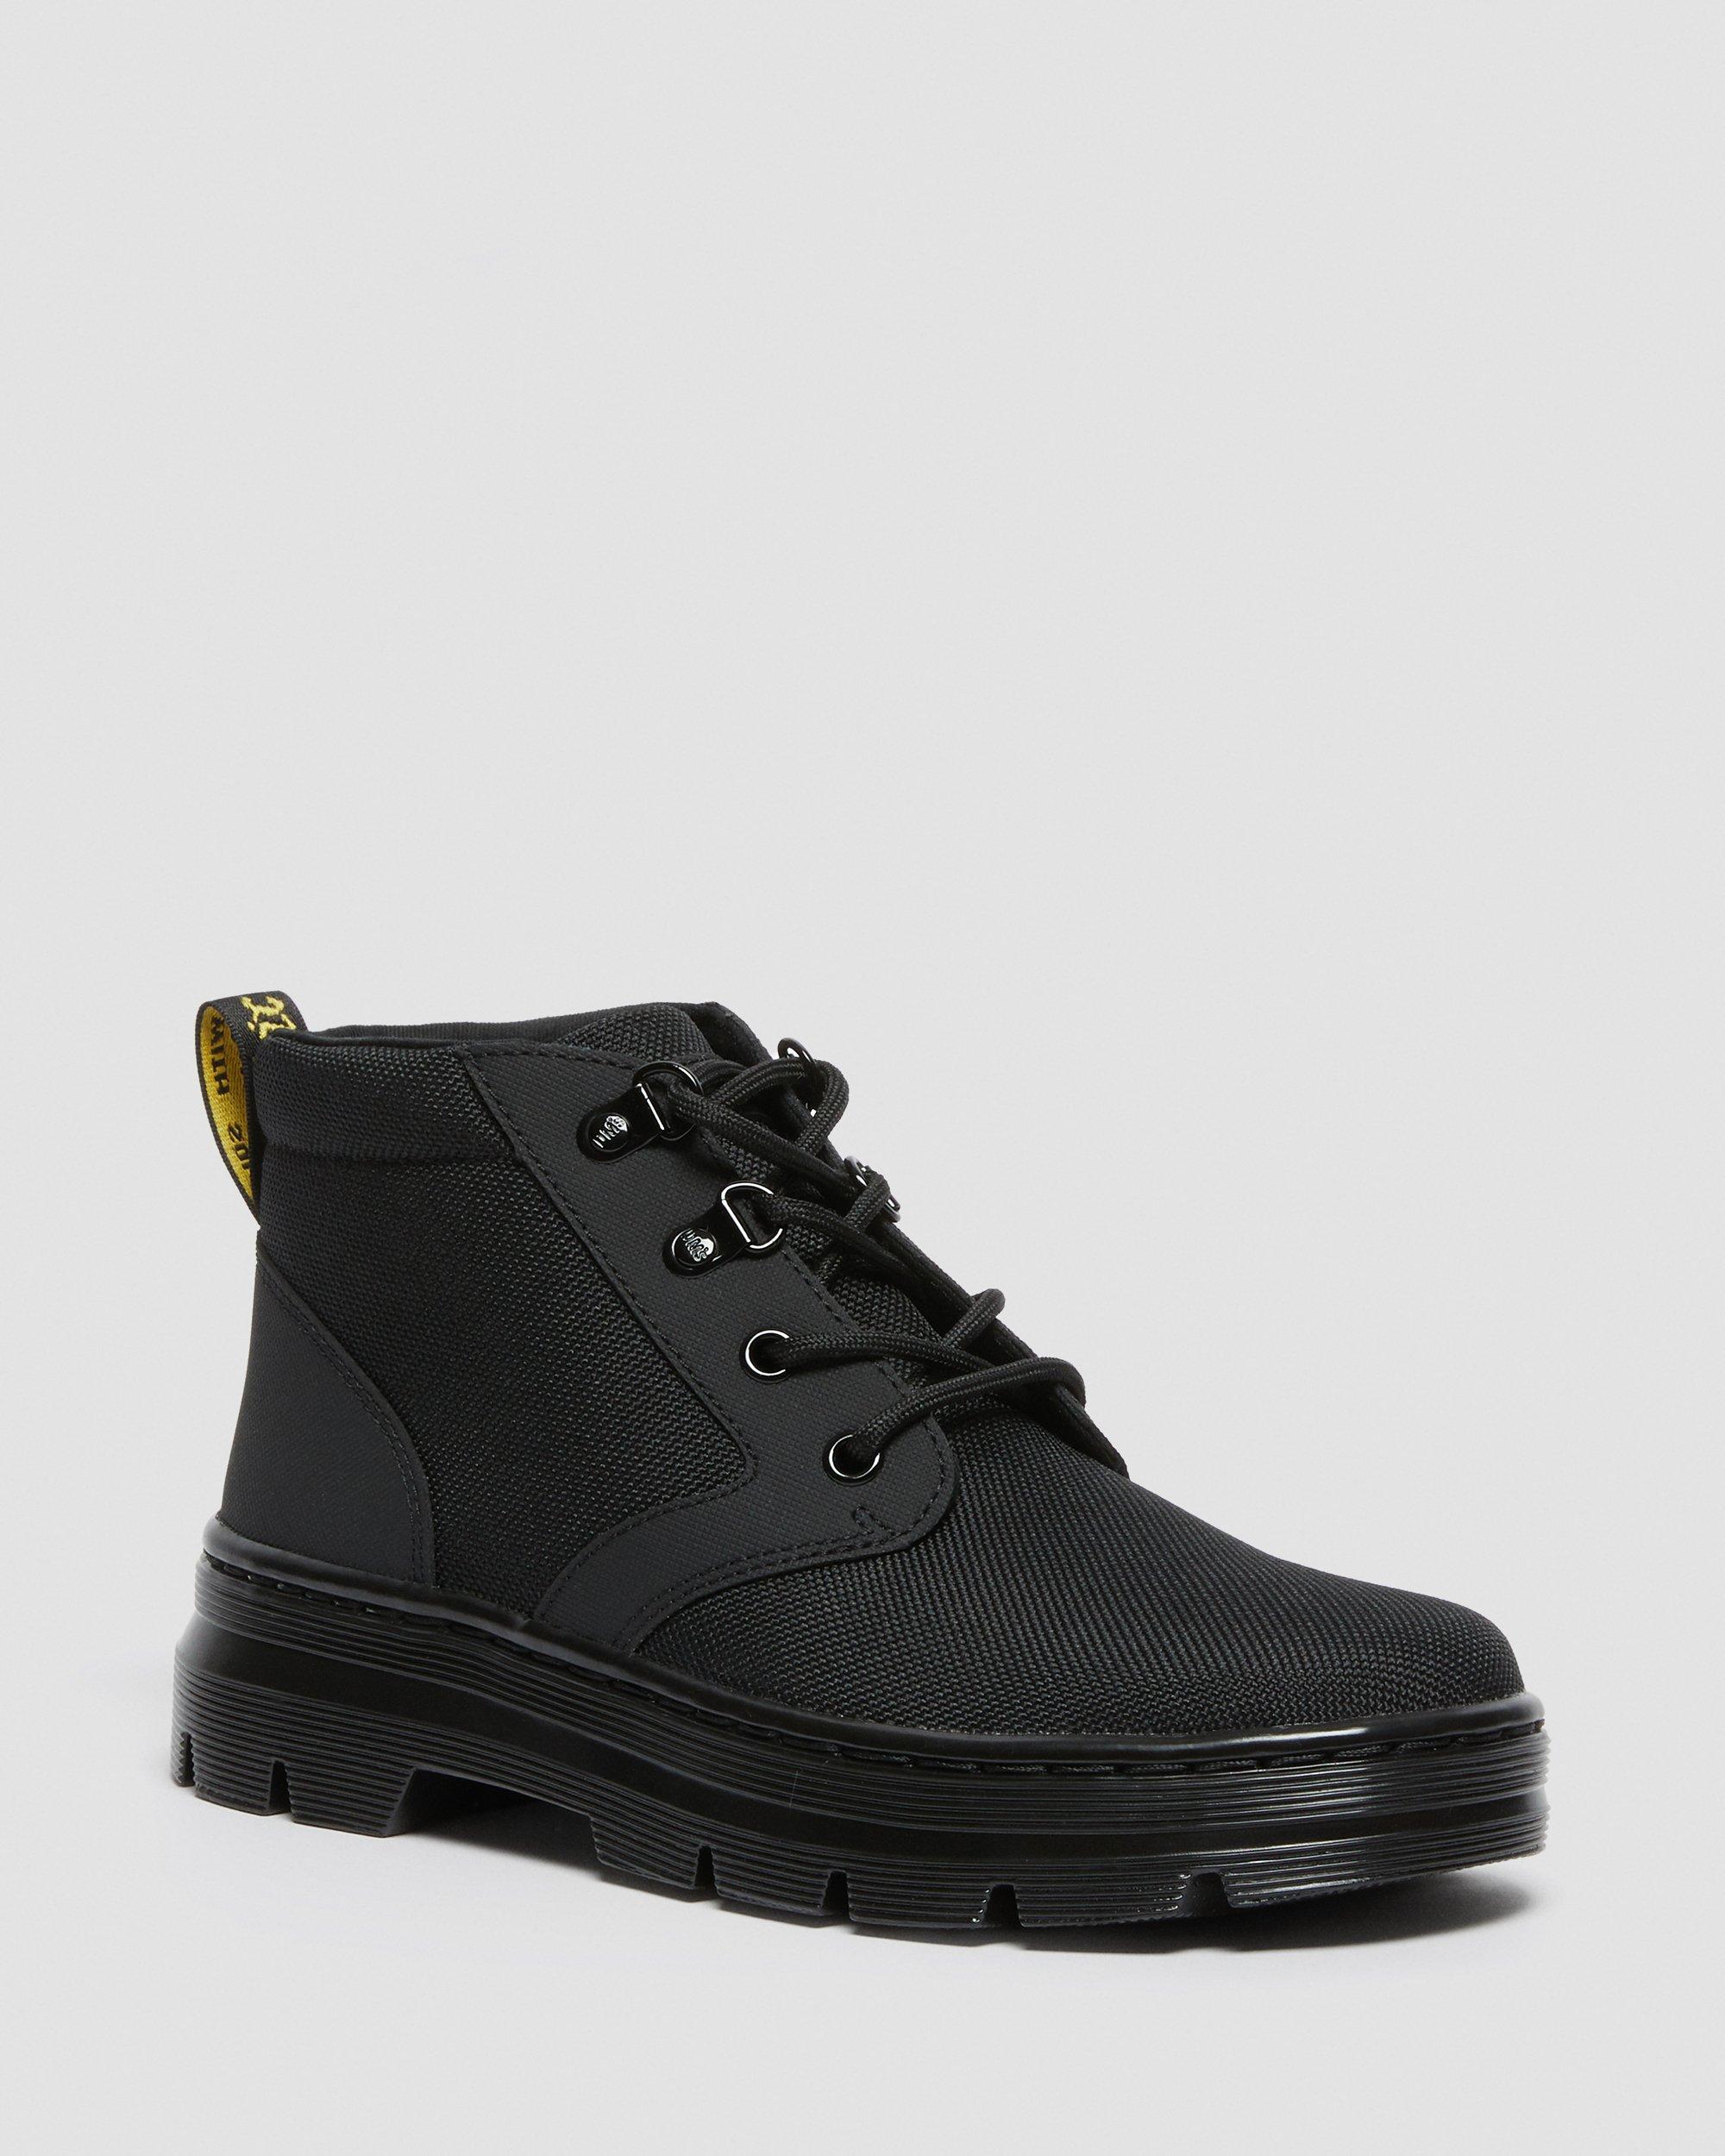 POLY CASUAL BOOTS | Dr. Martens Official